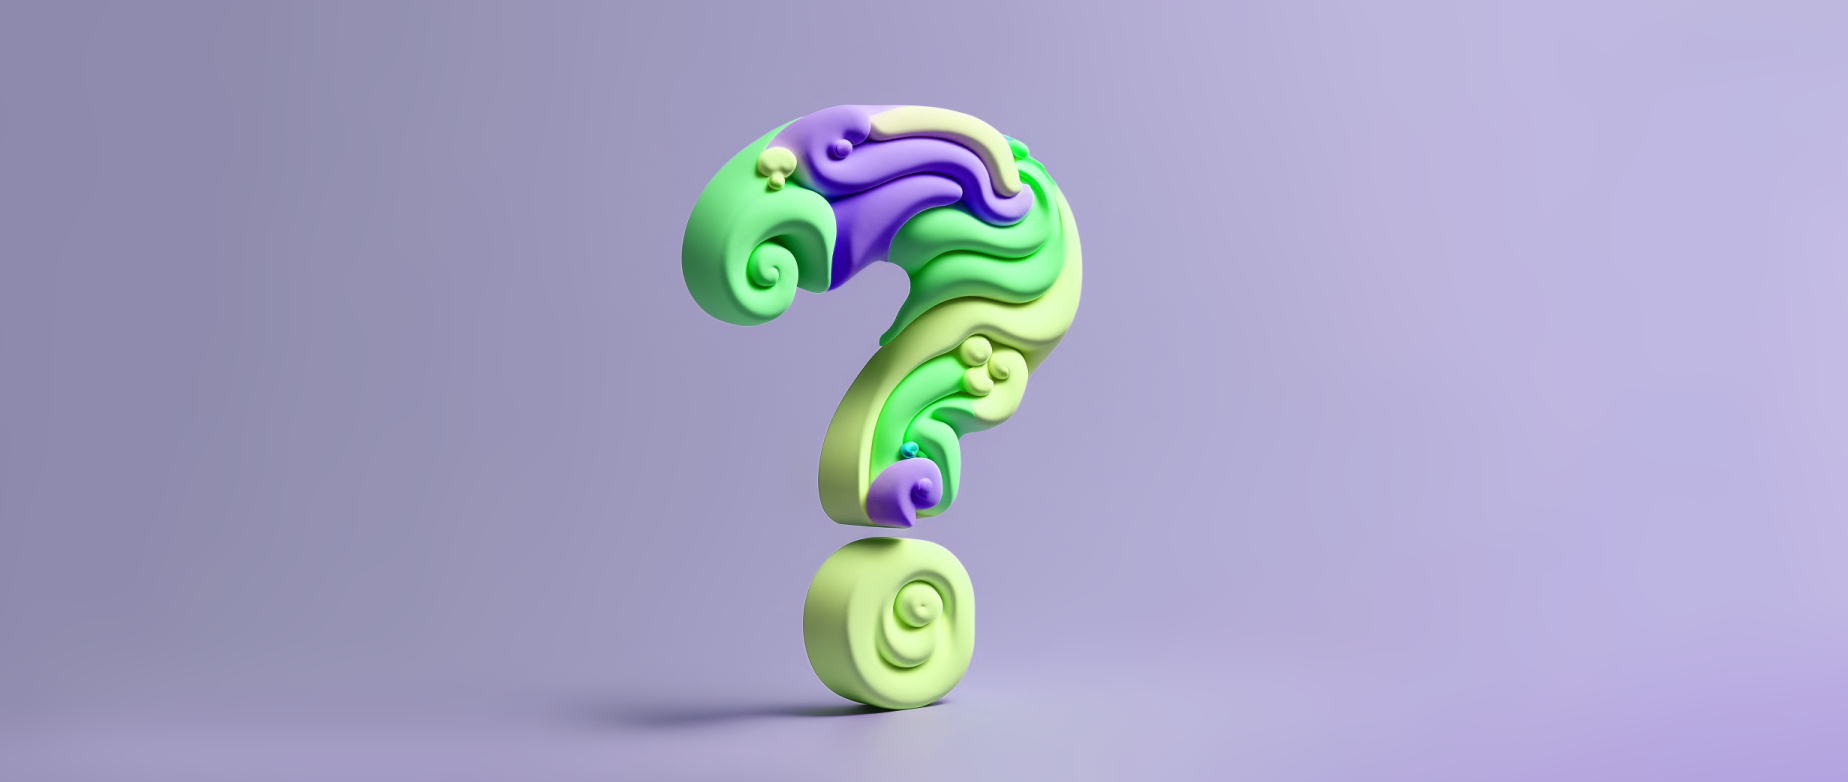 Light purple background with a green and purple question mark: what is graphic design